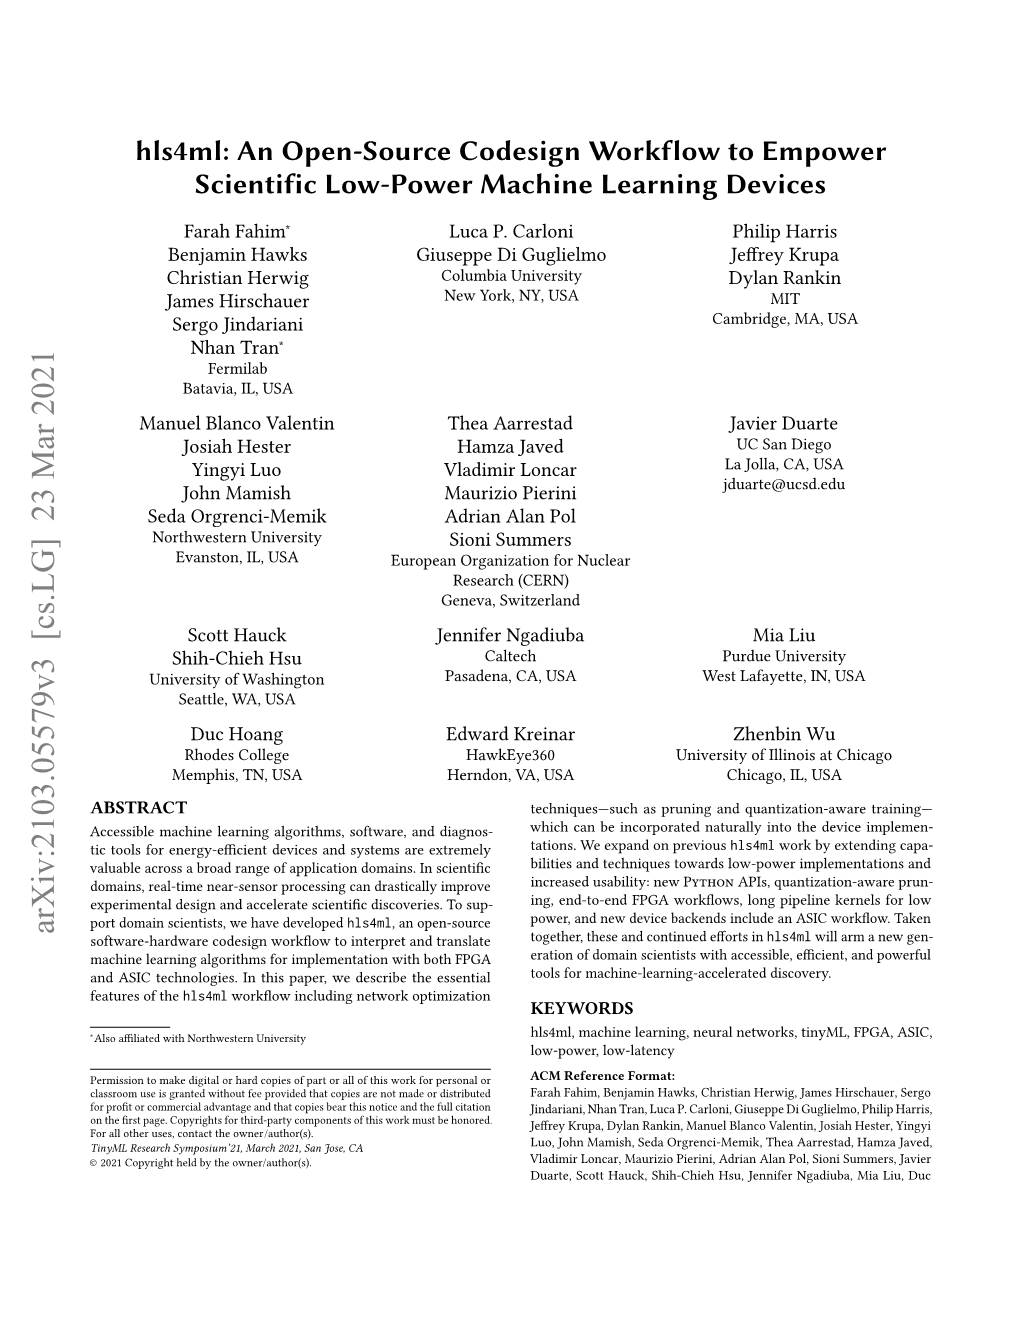 Hls4ml: an Open-Source Codesign Workflow to Empower Scientific Low-Power Machine Learning Devices